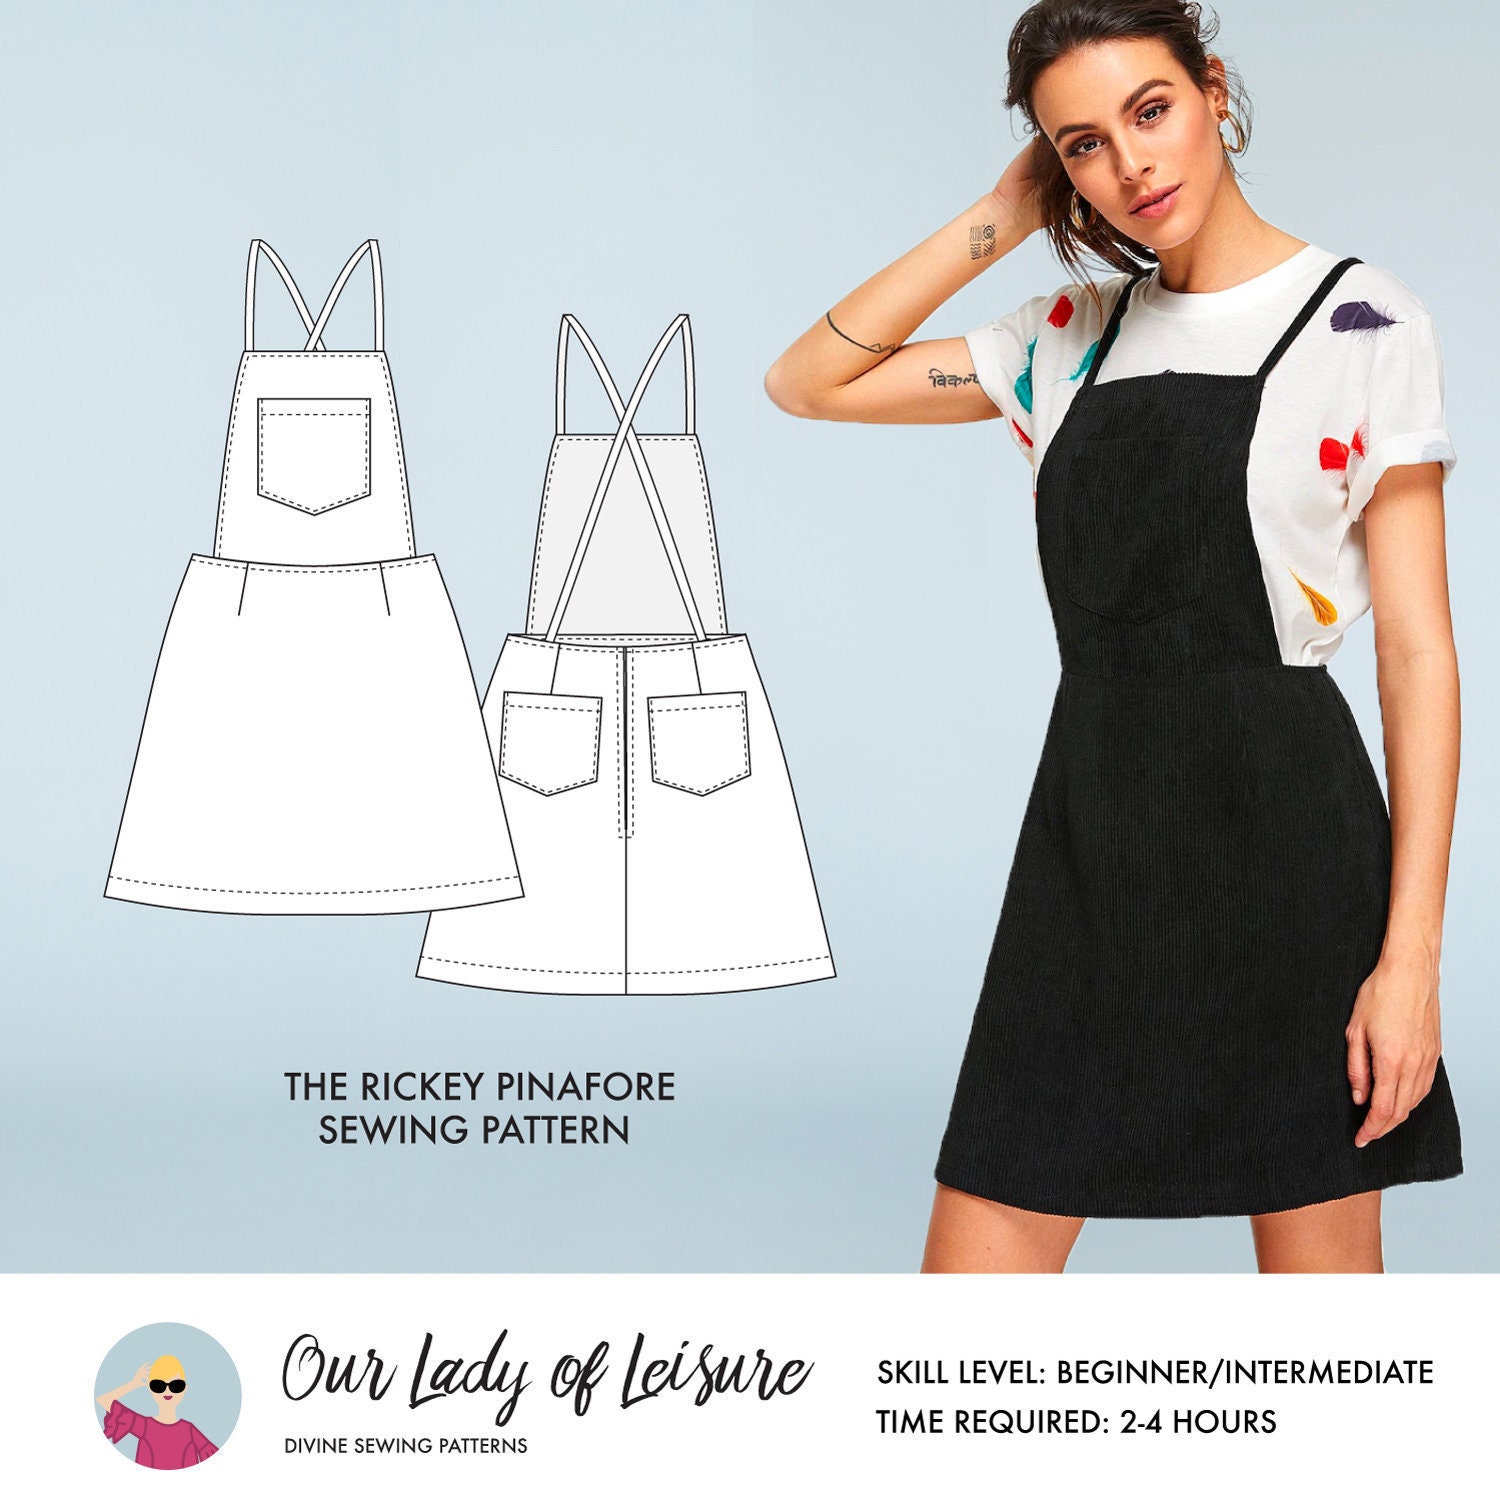 Gin and Tonic // Now With Plus Sizes // Colorblock Dress Pattern